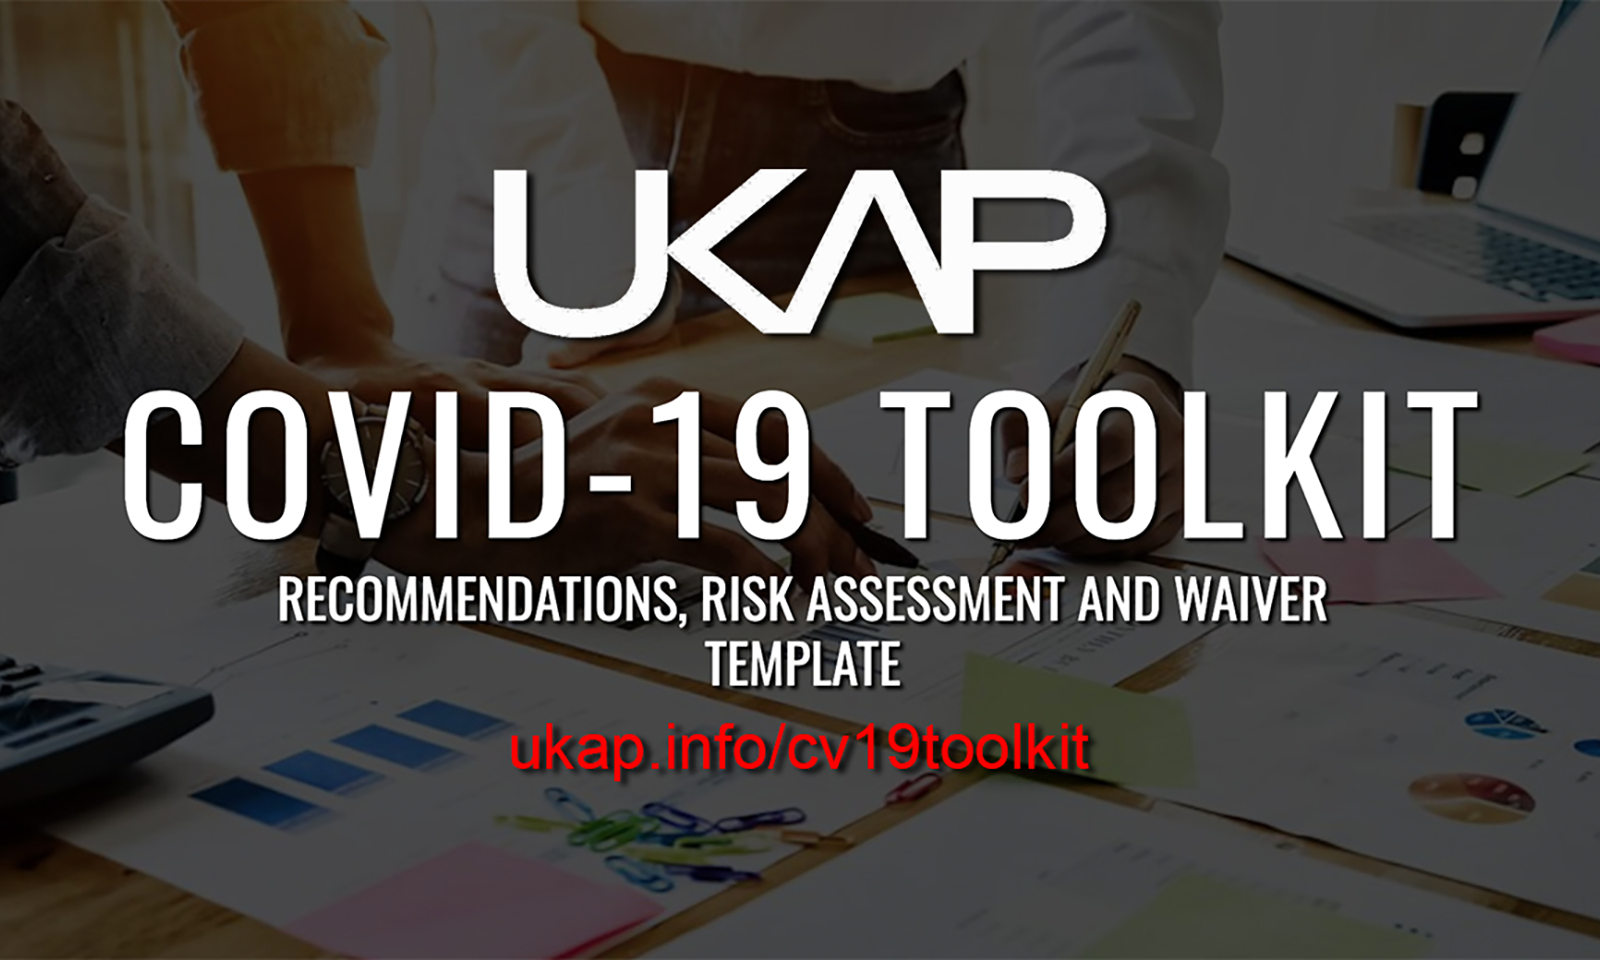 UKAP Releases COVID-19 Toolkit to Help Prepare for Reopening